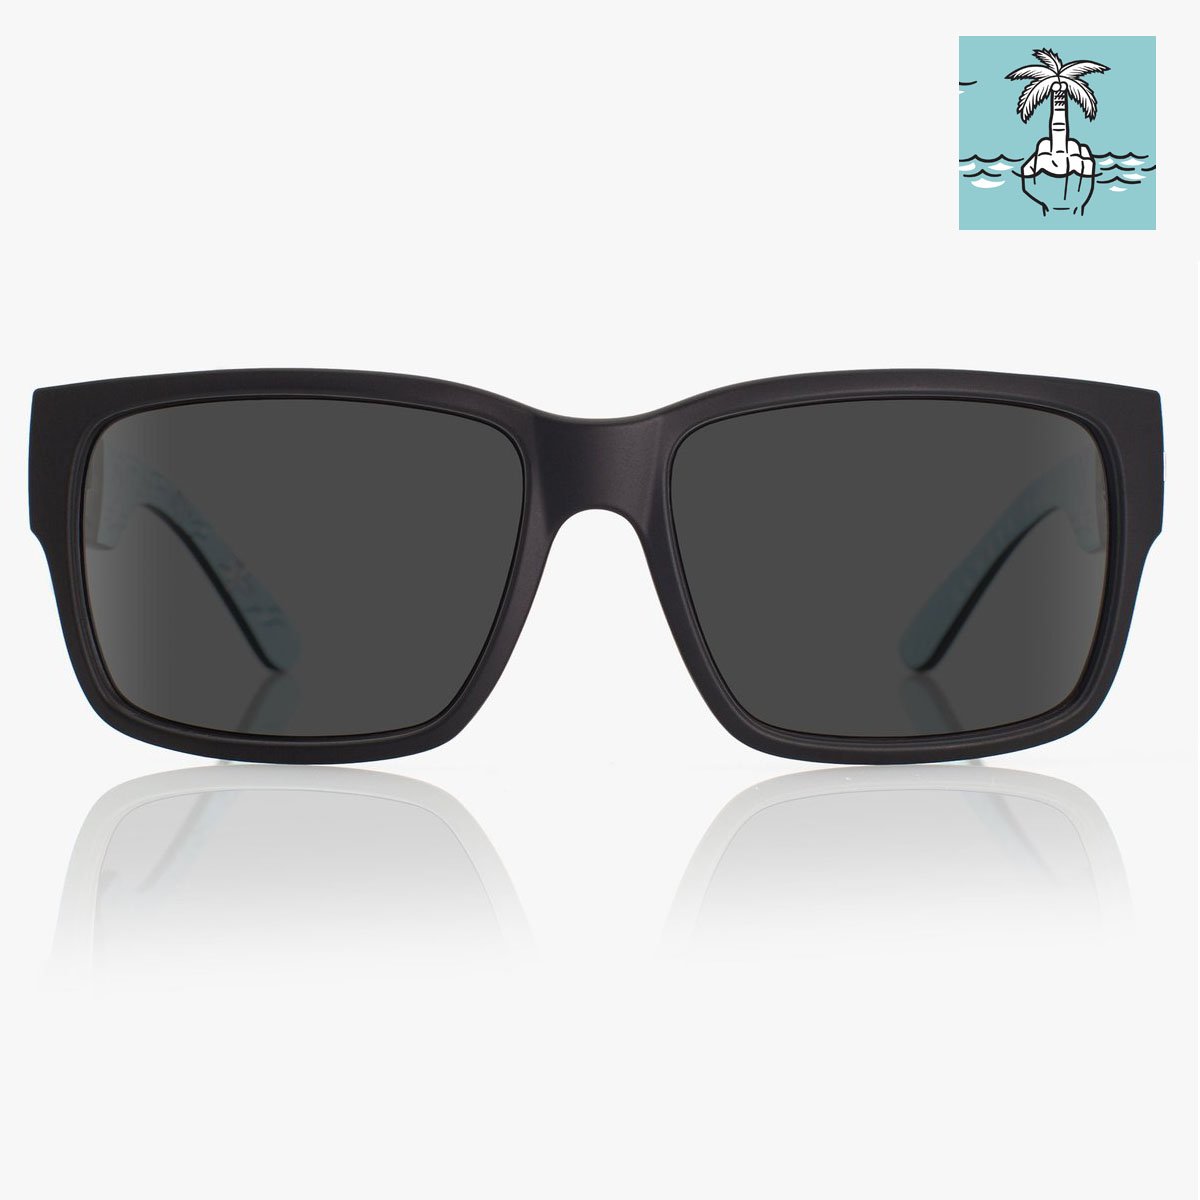 black sunglass for men with big heads